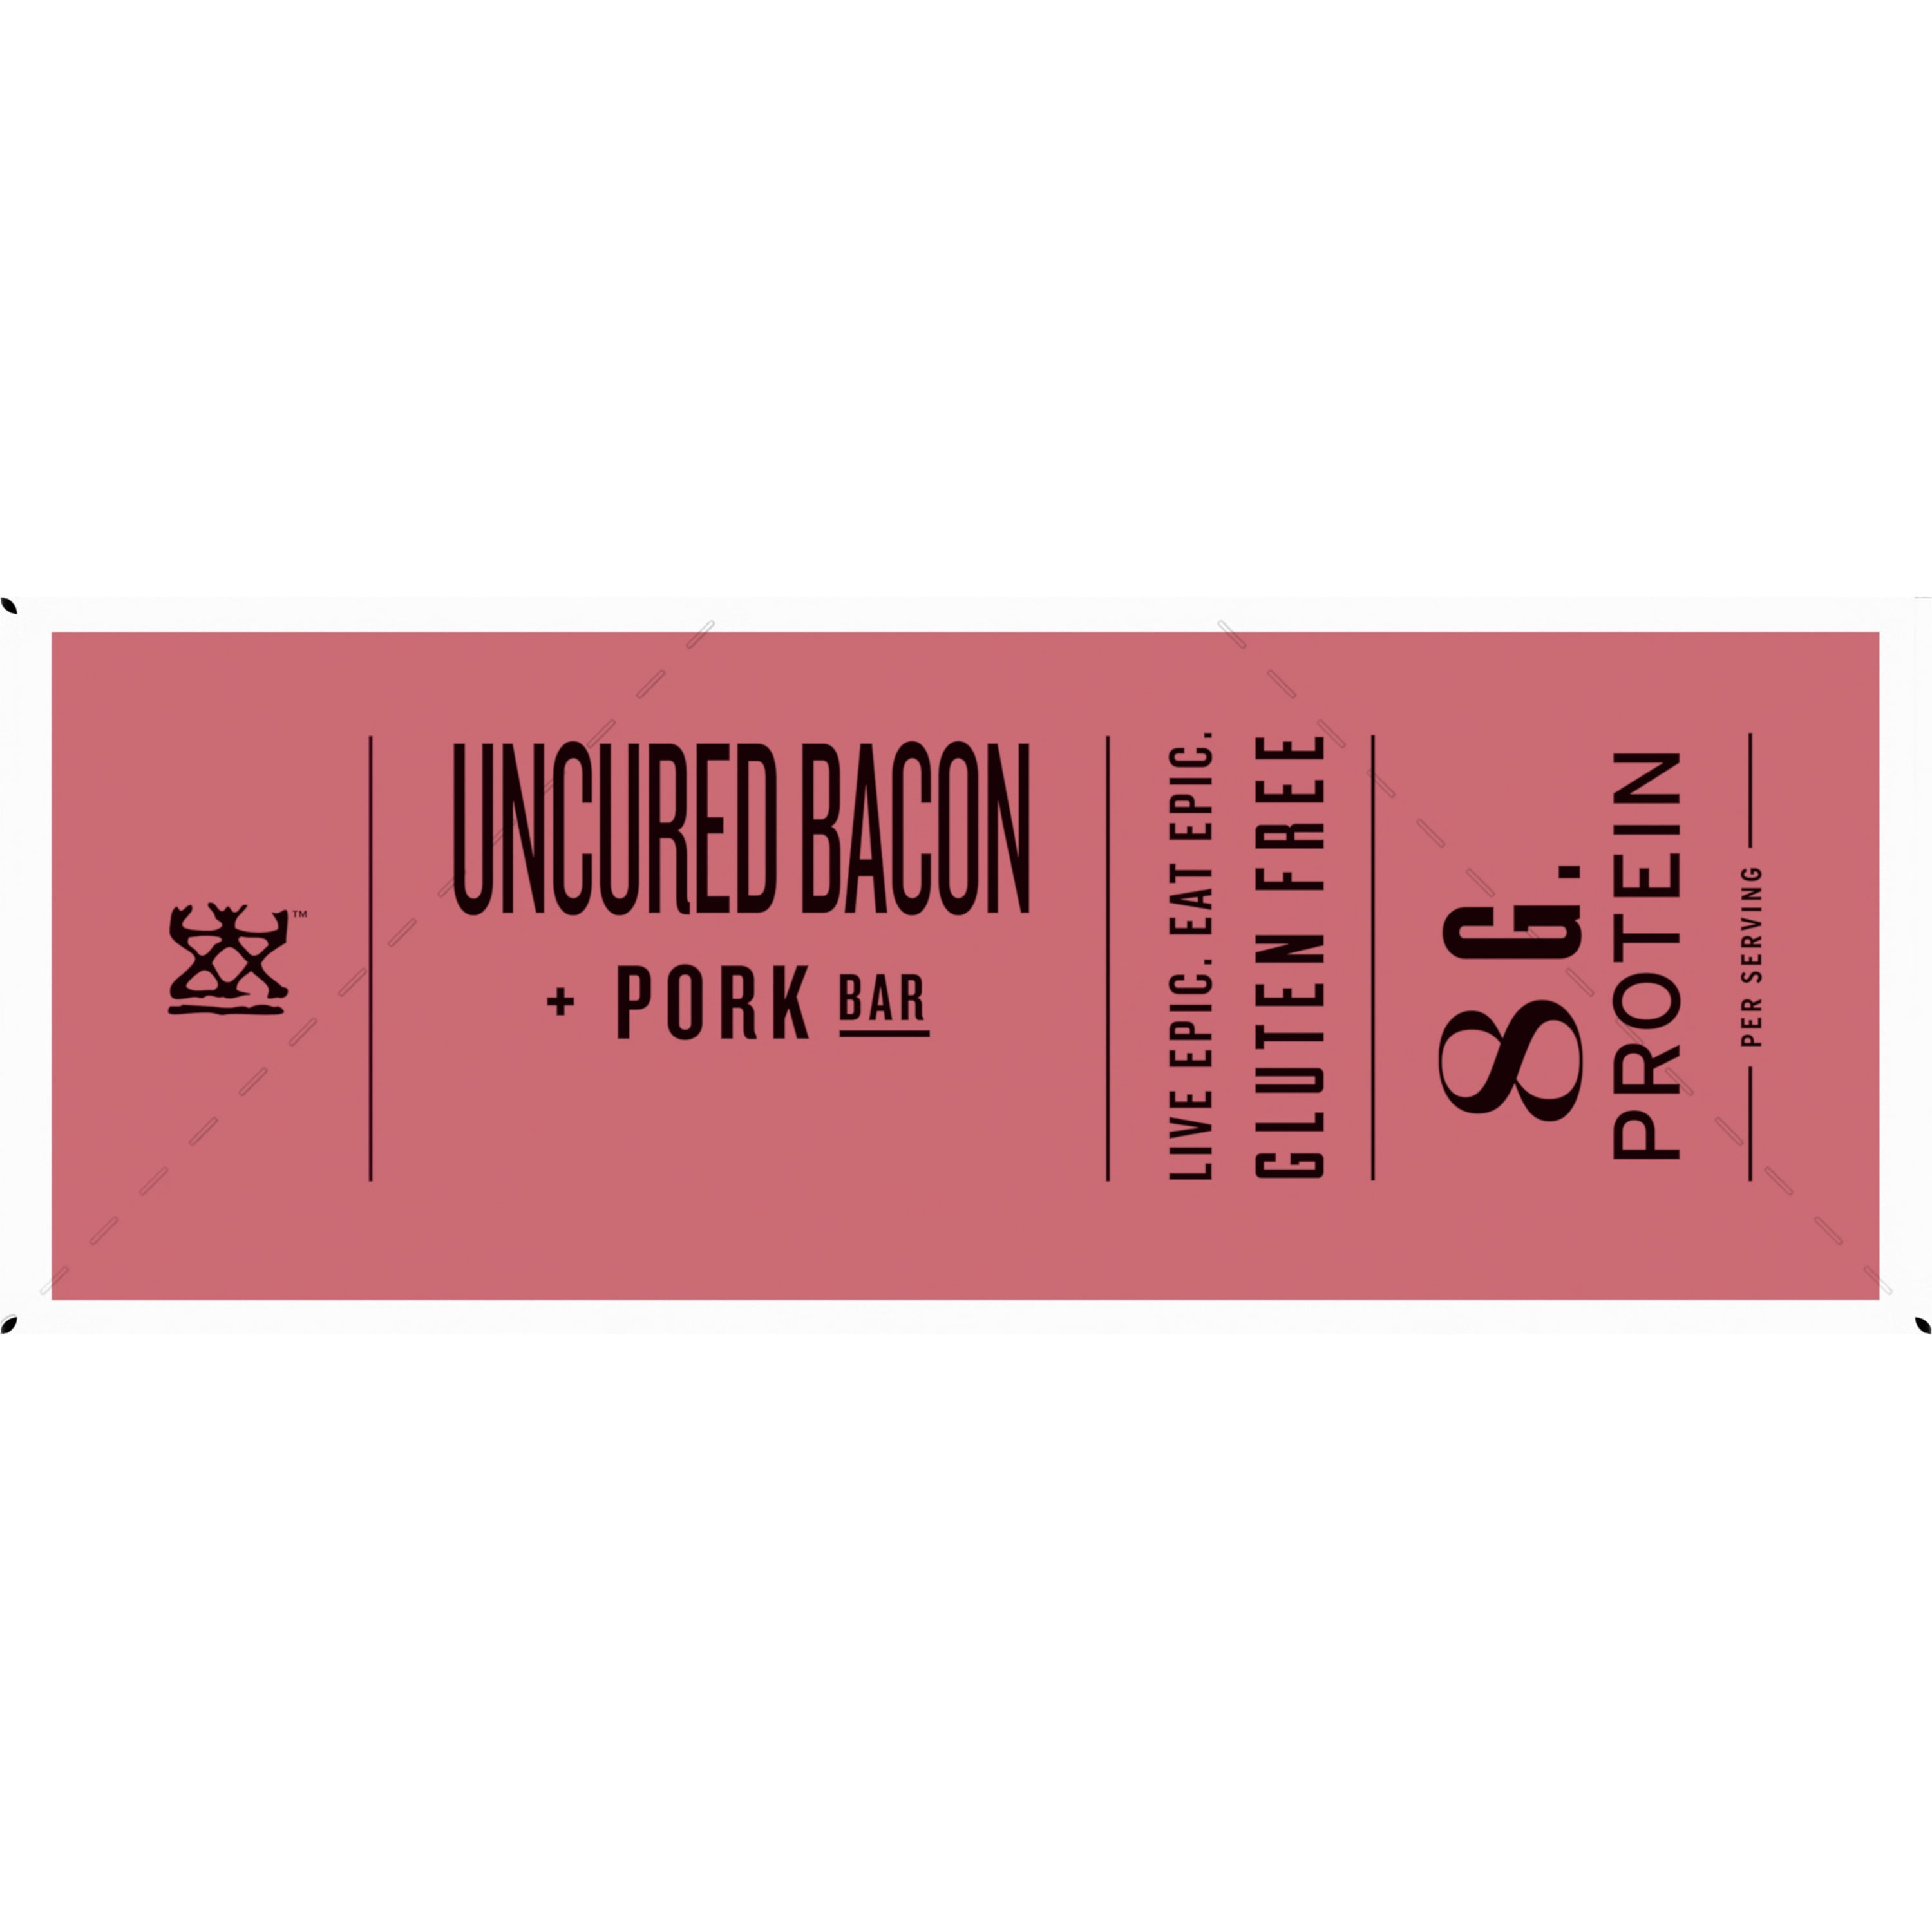 EPIC™ Uncured Bacon and Pork Bars, 12 ct / 1.5 oz - City Market